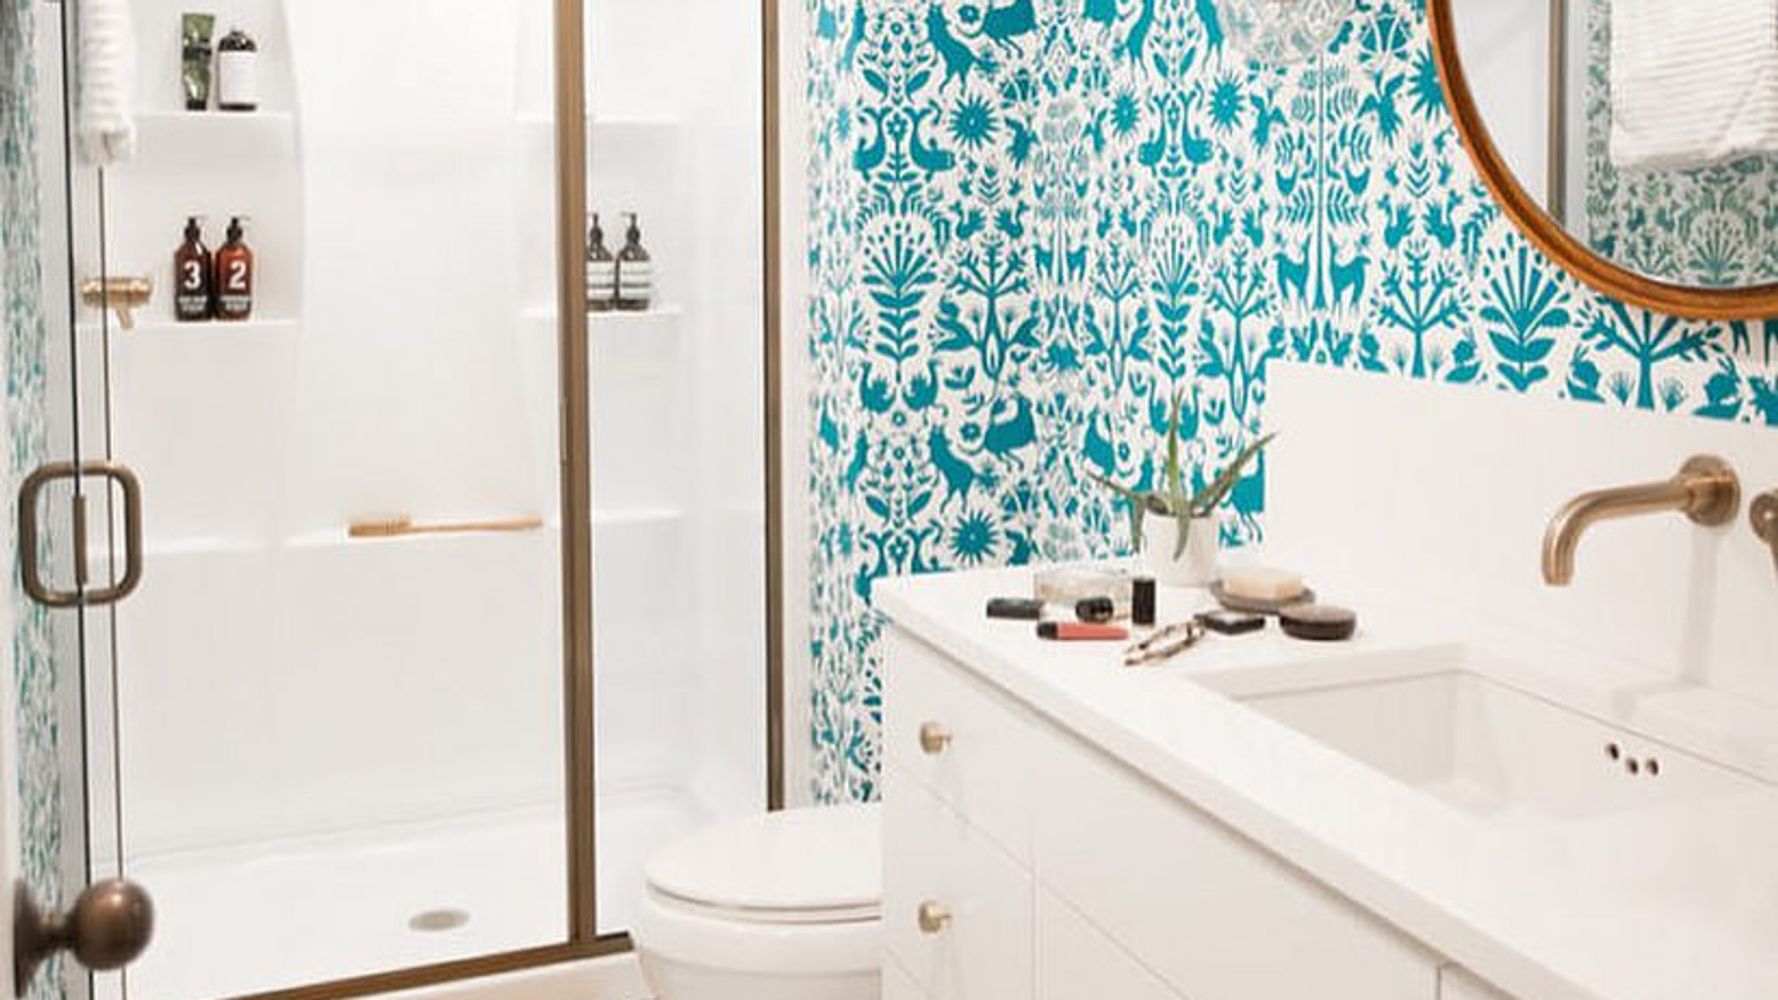 How To Use Wallpaper And Tiles Together | HuffPost Contributor